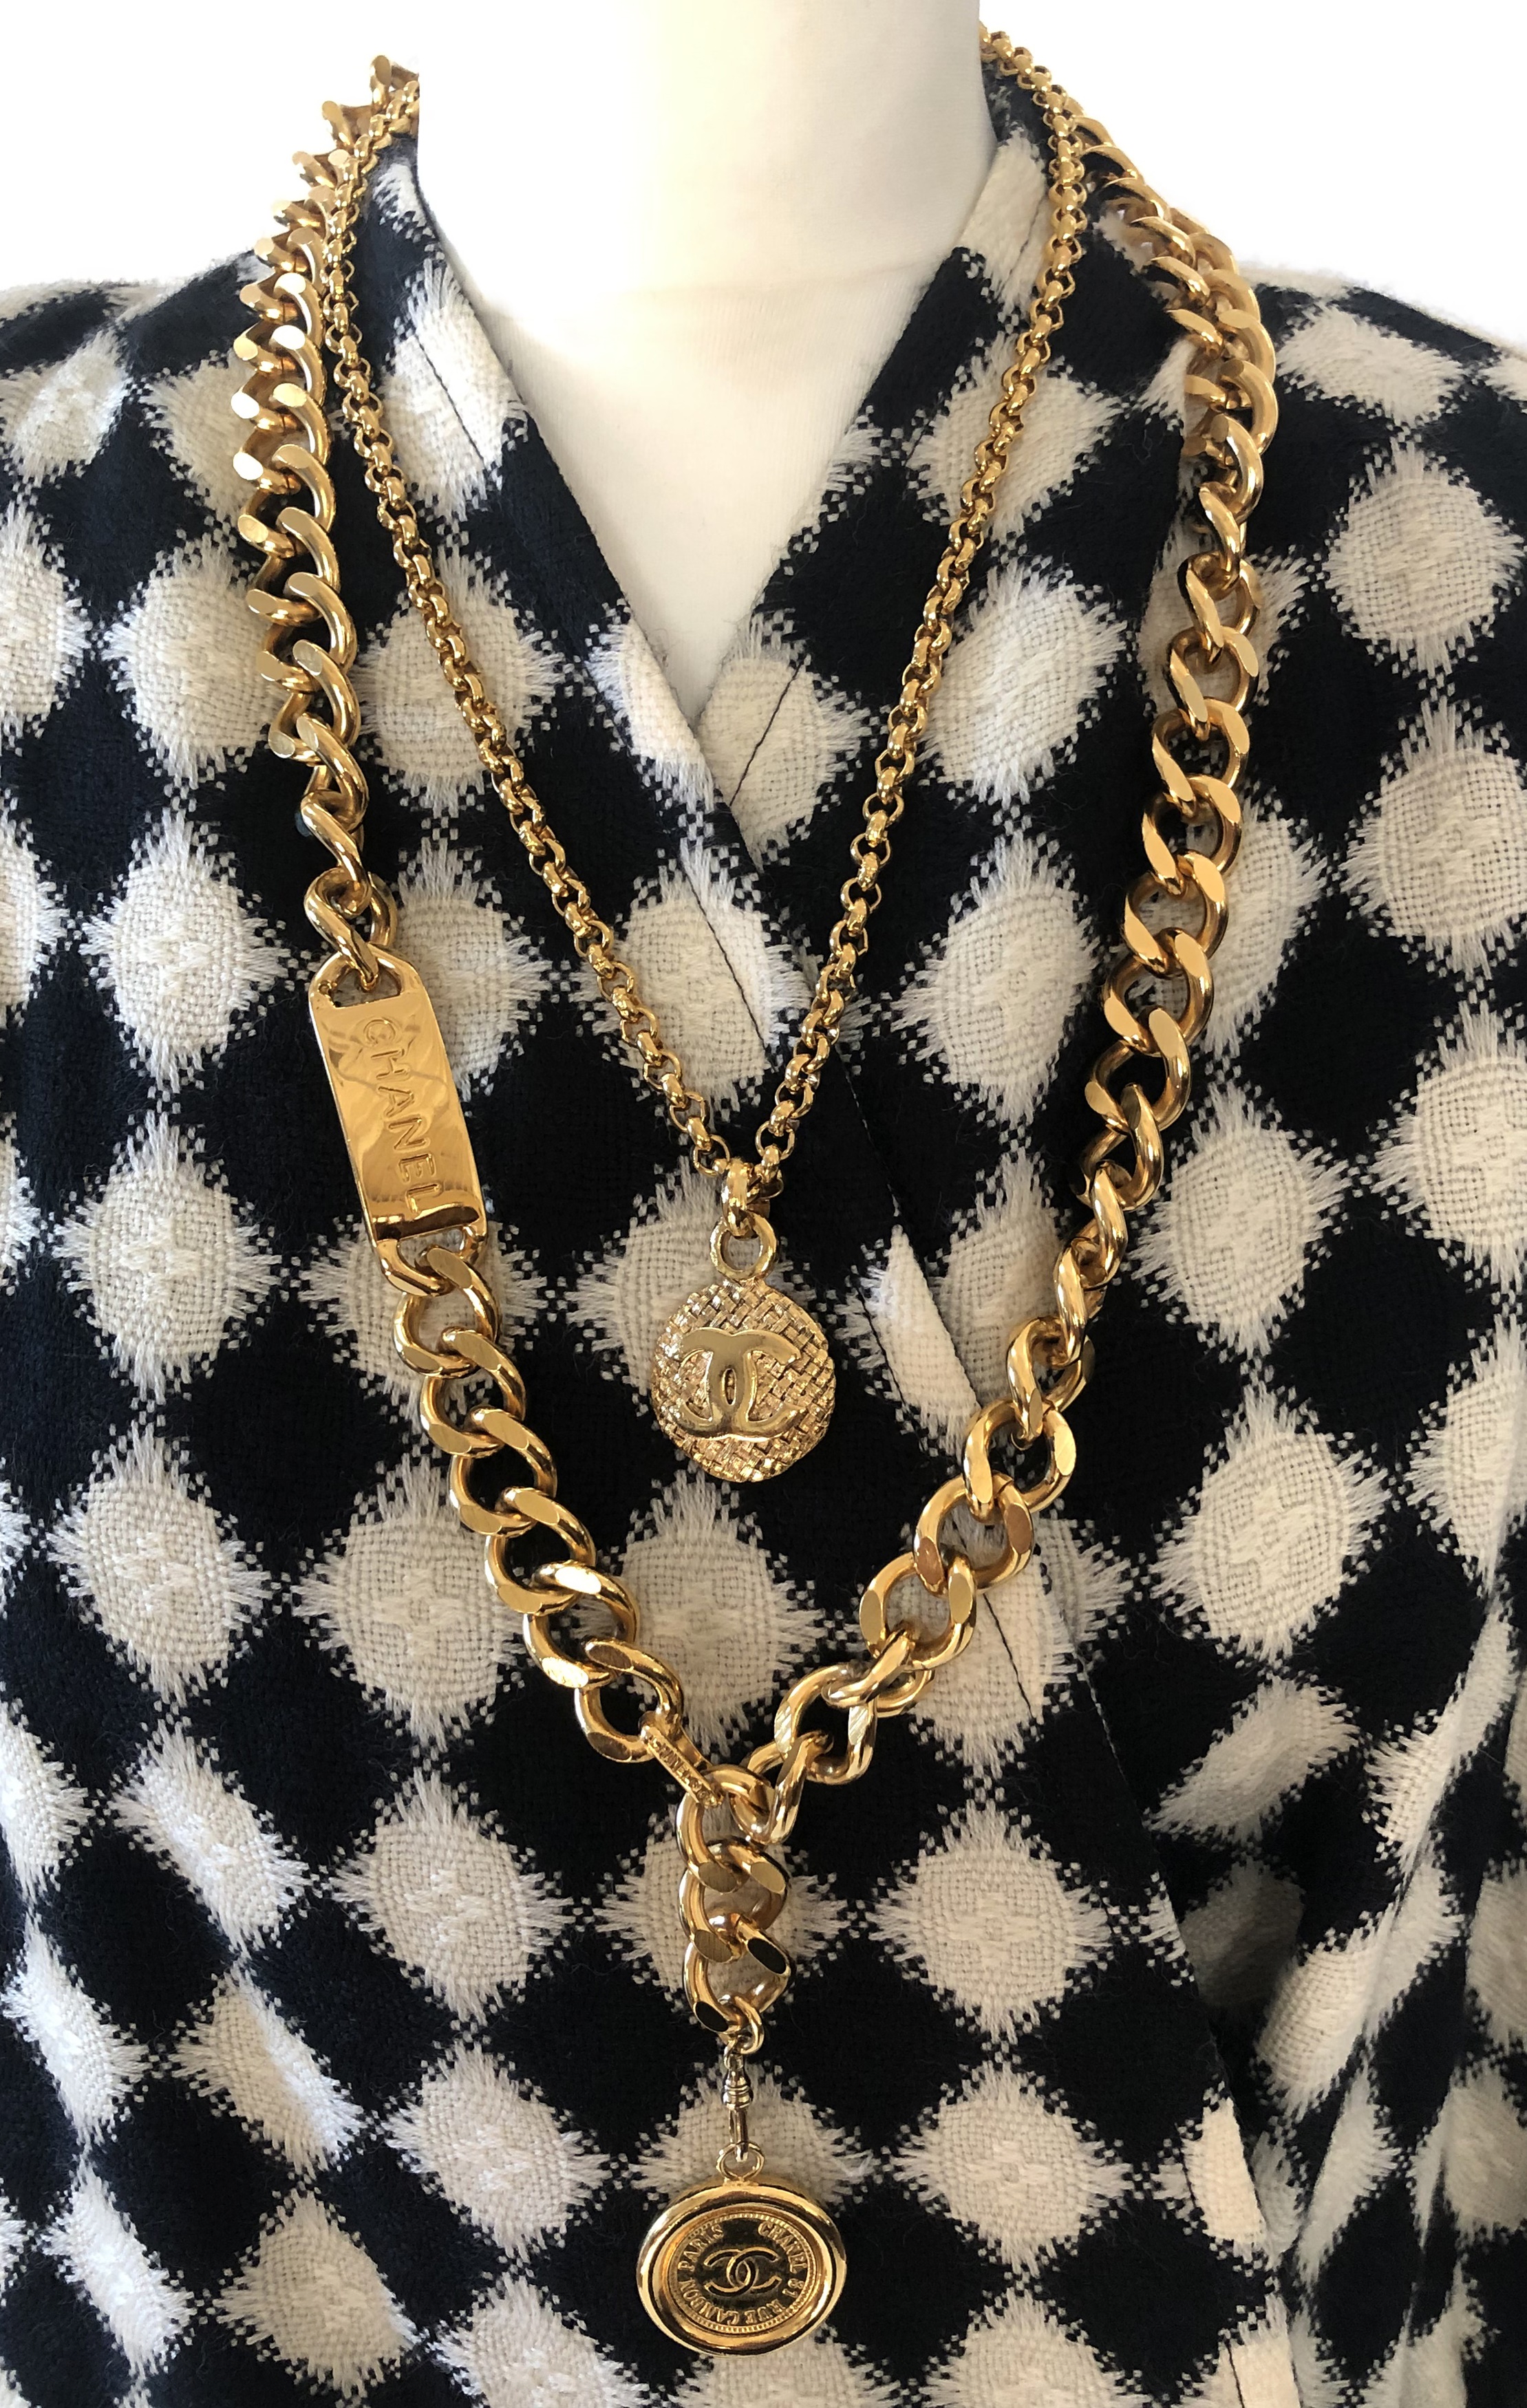 Chanel necklaces and Karl Lagerfeld coat